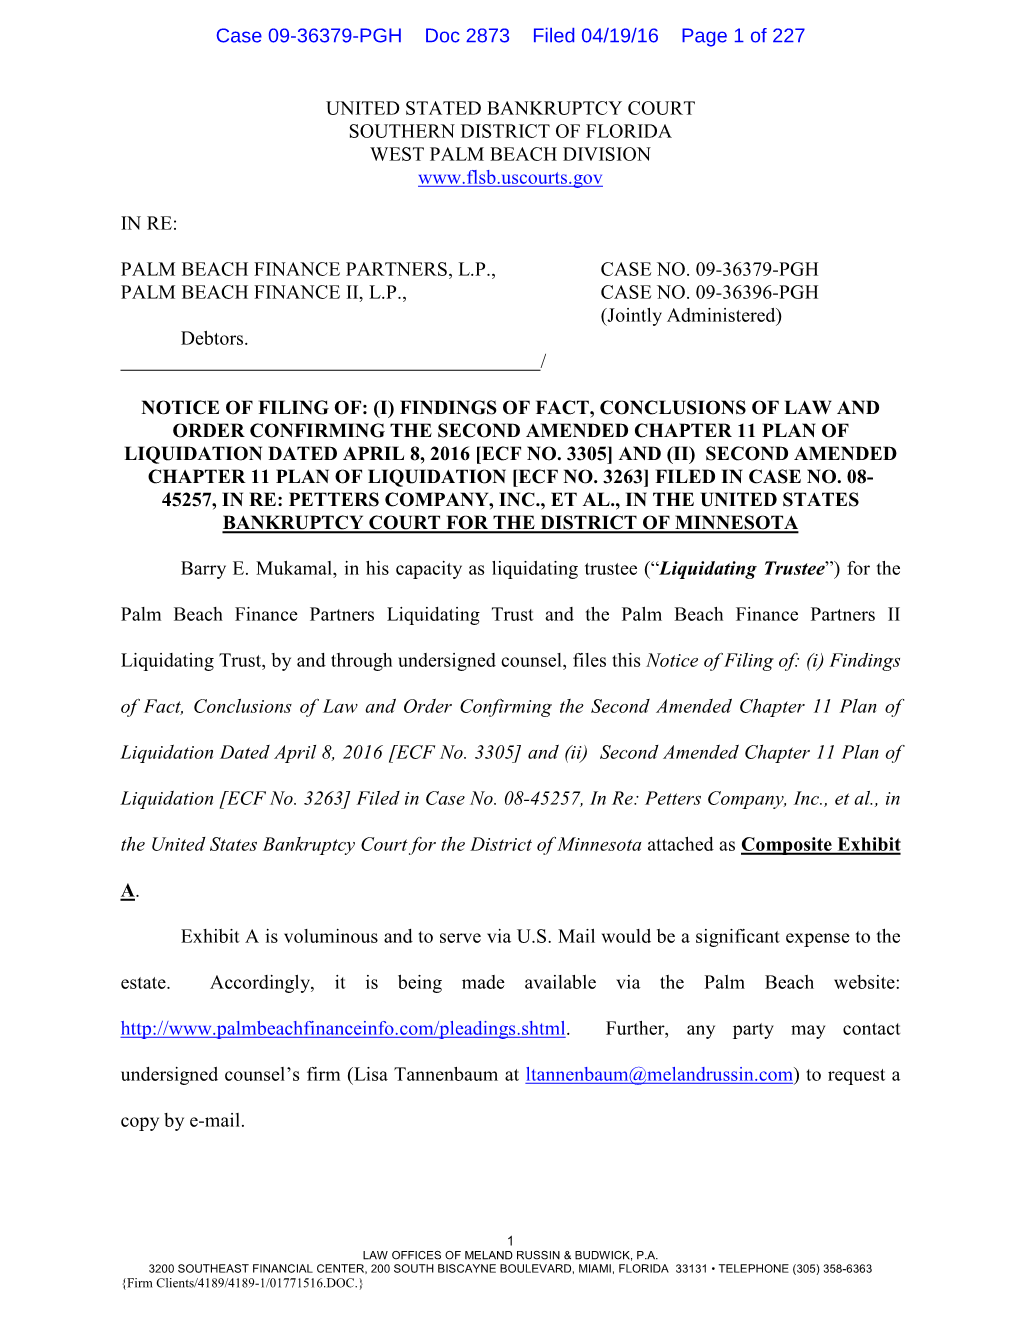 Notice of Filing Exhibit a to Trustee's Motion (1) to Approve Settlement